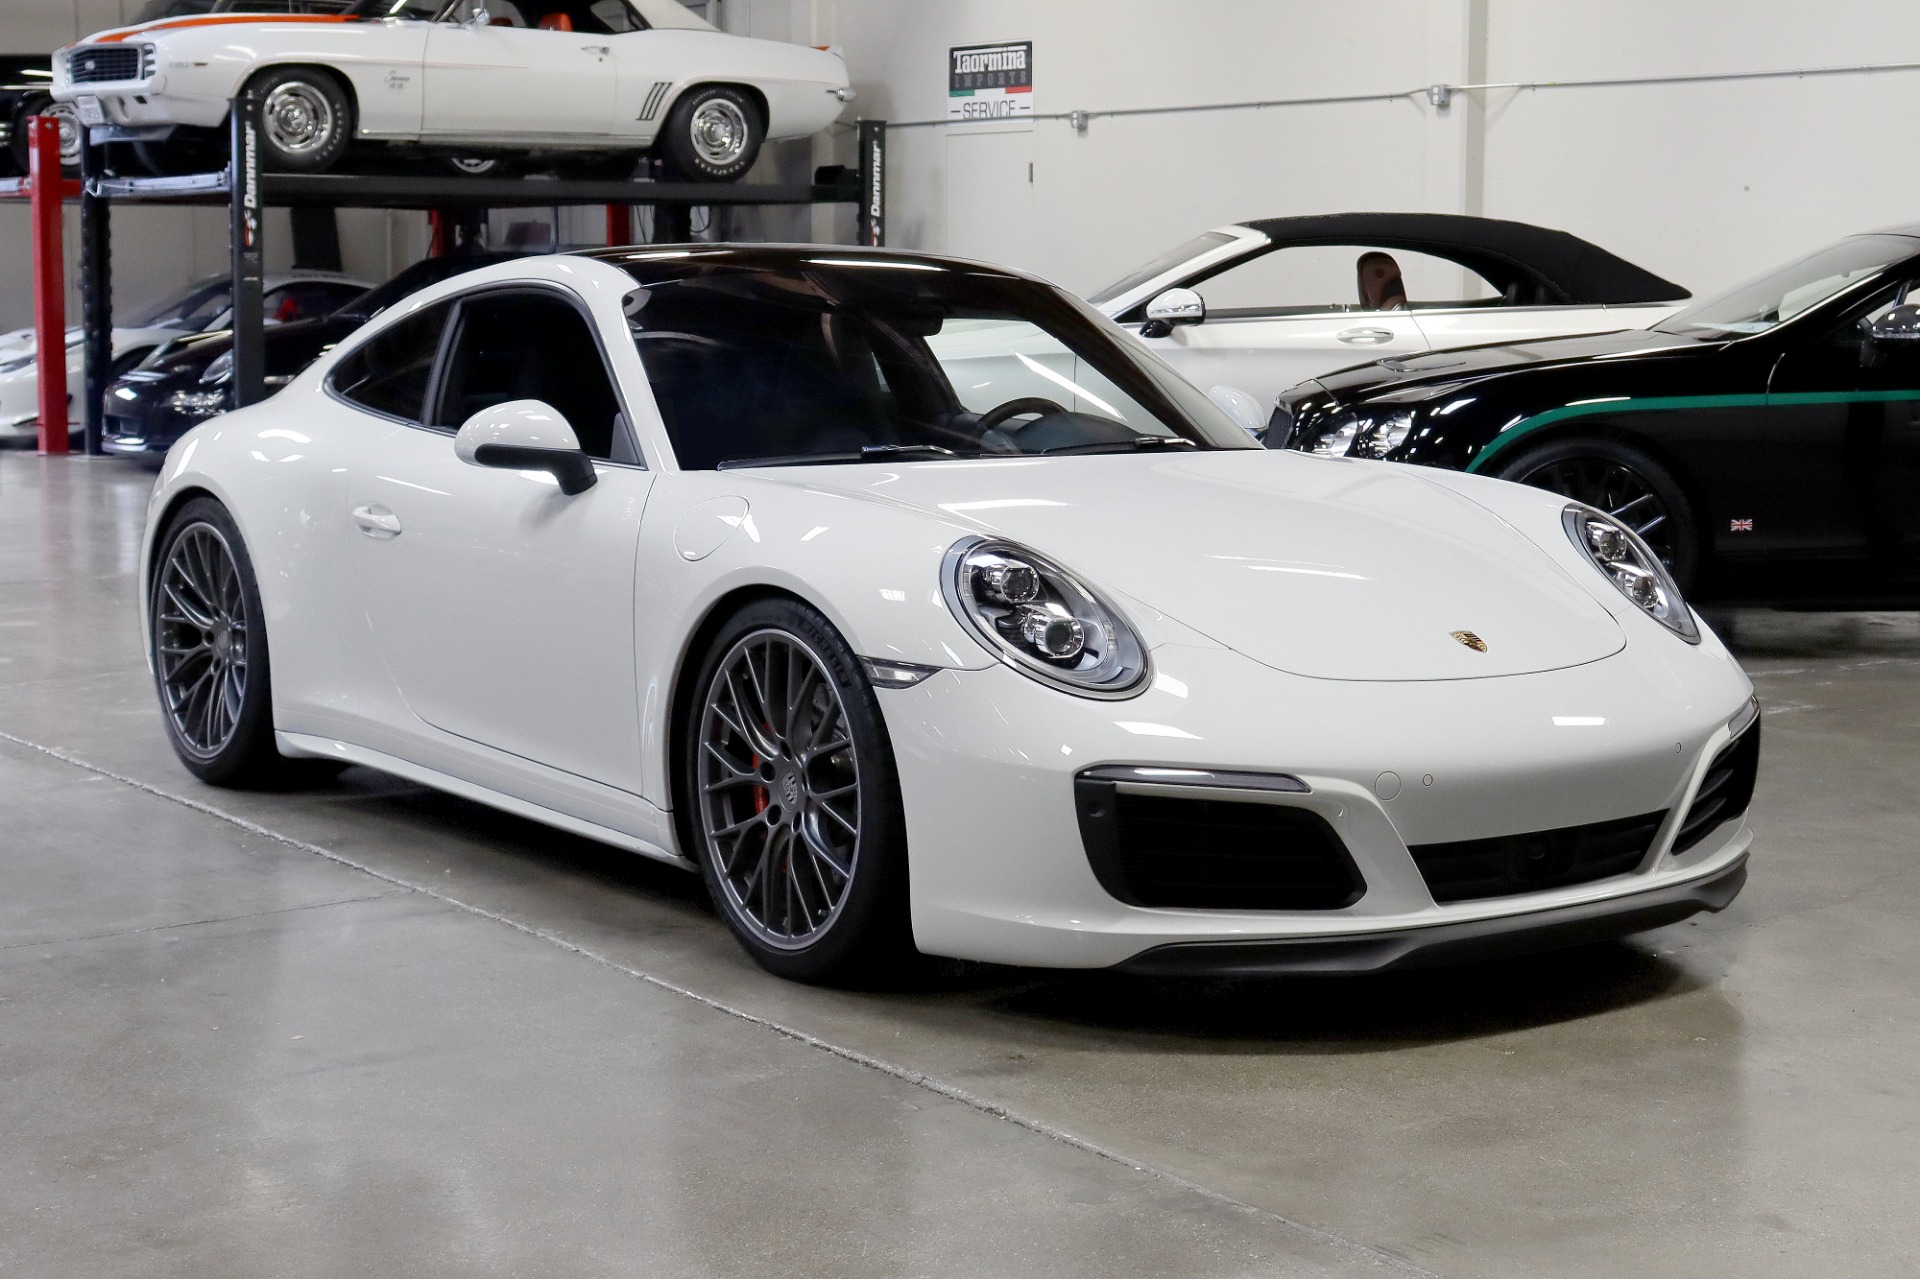 Used 2019 Porsche 911 Carrera 4S for sale Sold at San Francisco Sports Cars in San Carlos CA 94070 1